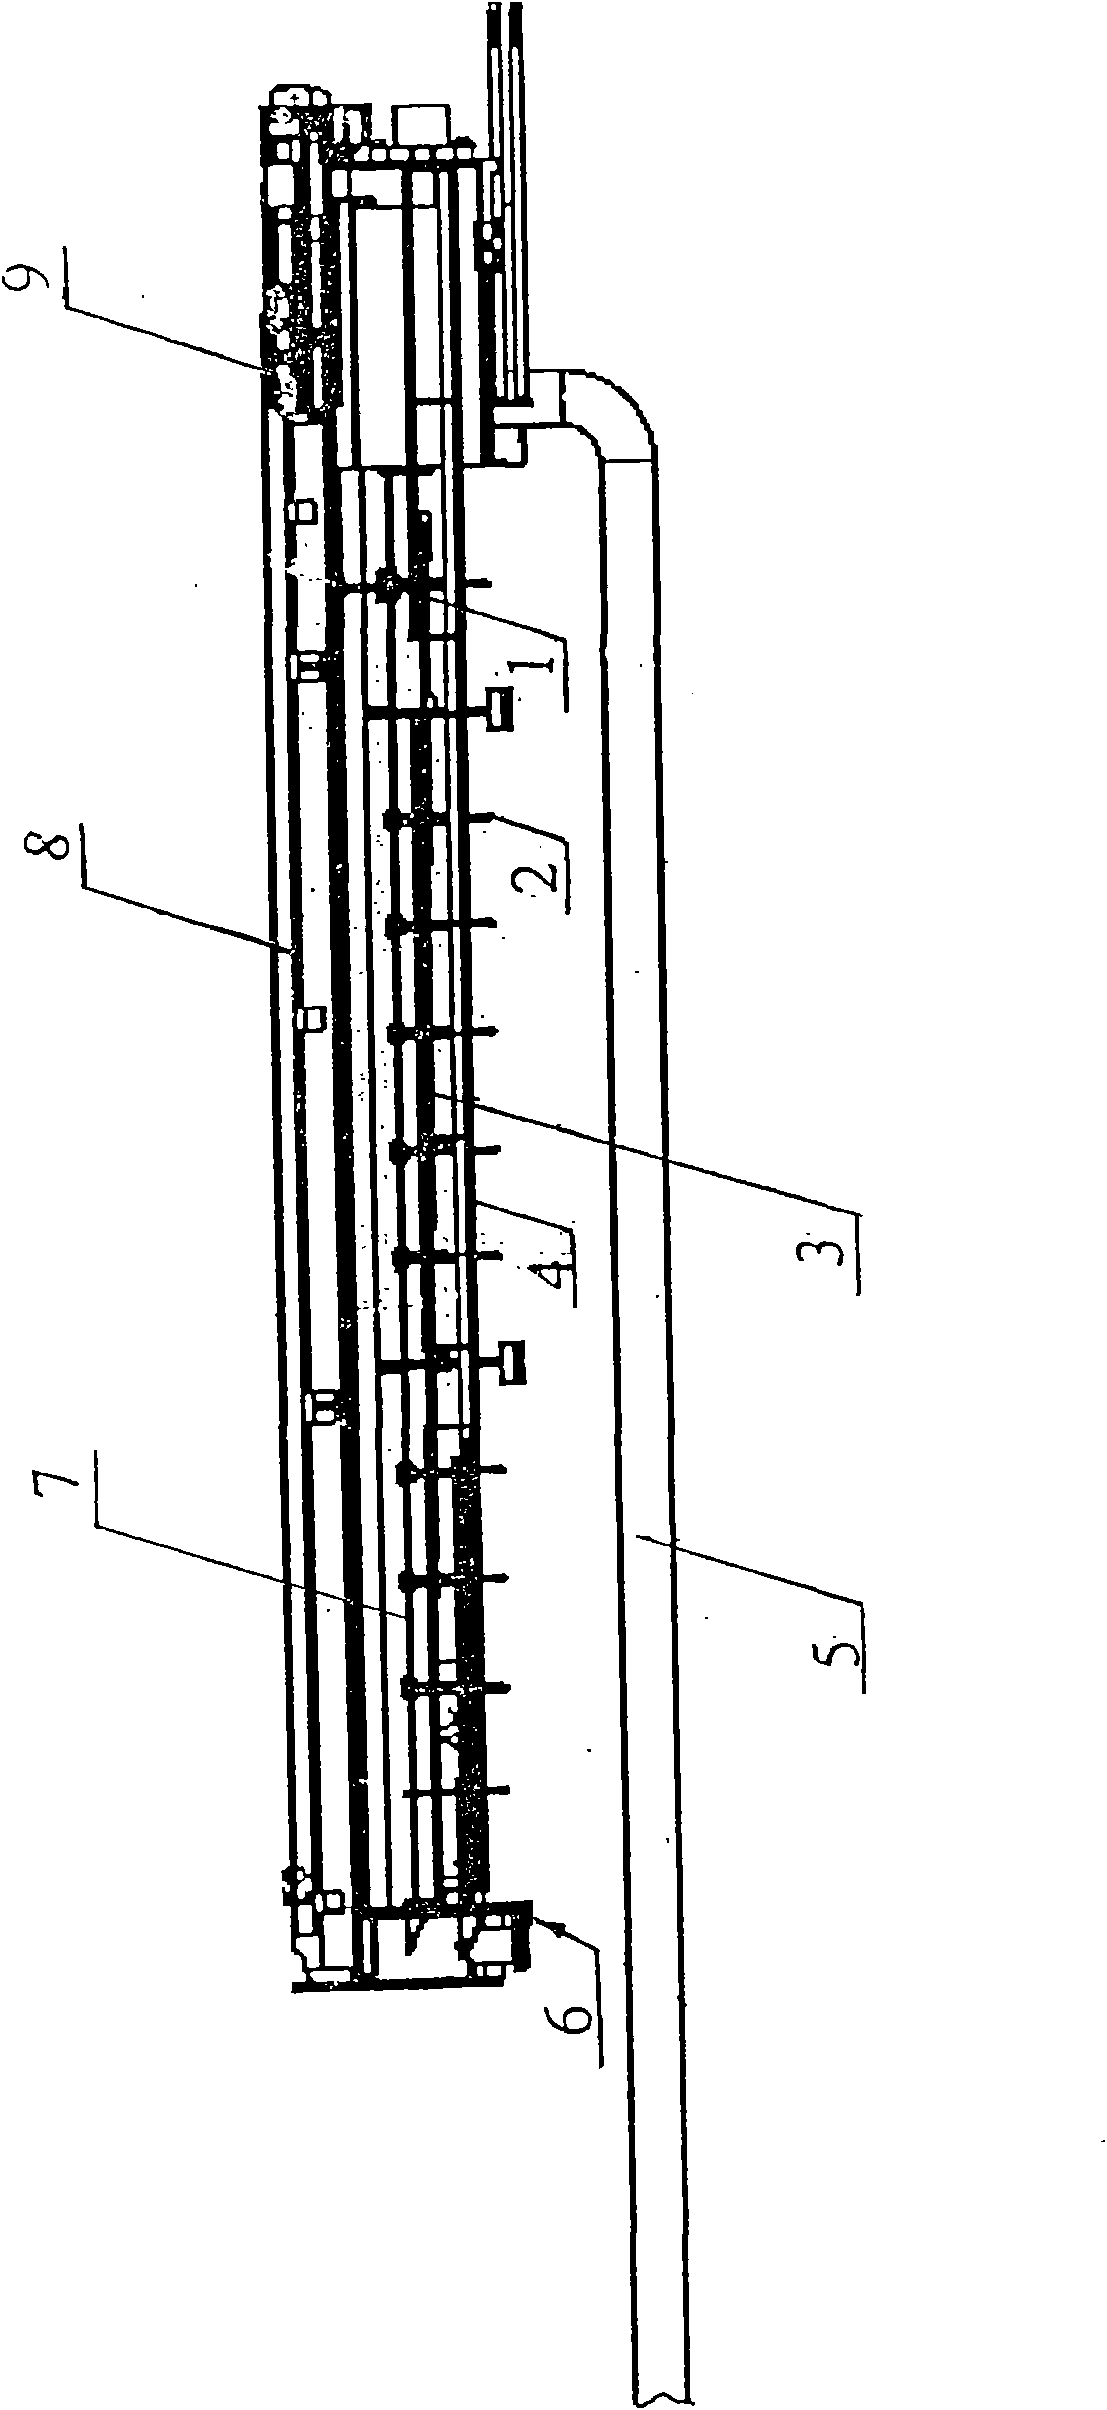 Structure for manually orienting vertical wind-guiding vanes of indoor units of wall-mounted air conditioners